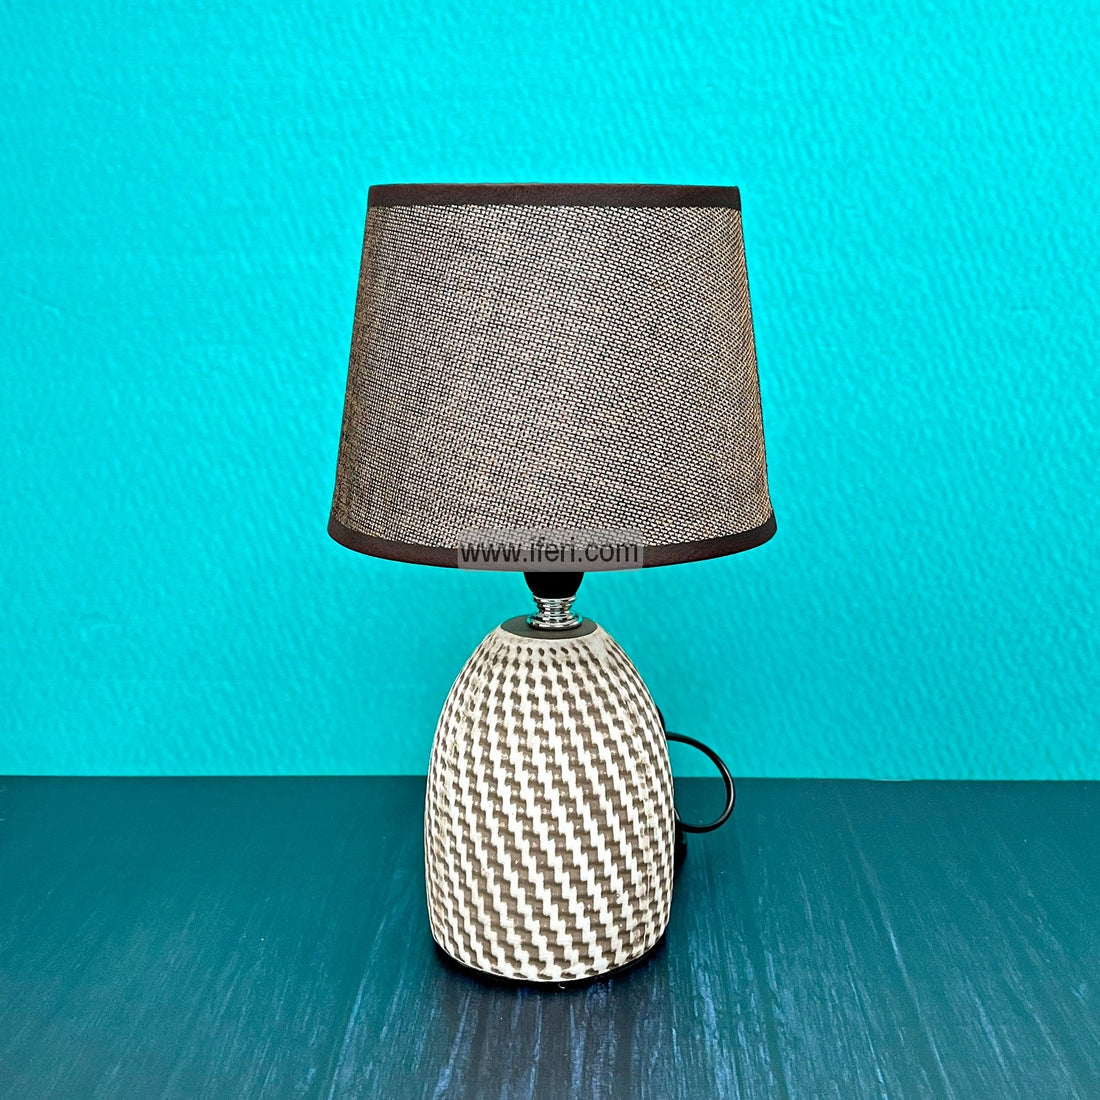 12 Inch Ceramic Table Lamp Available in Bangladesh